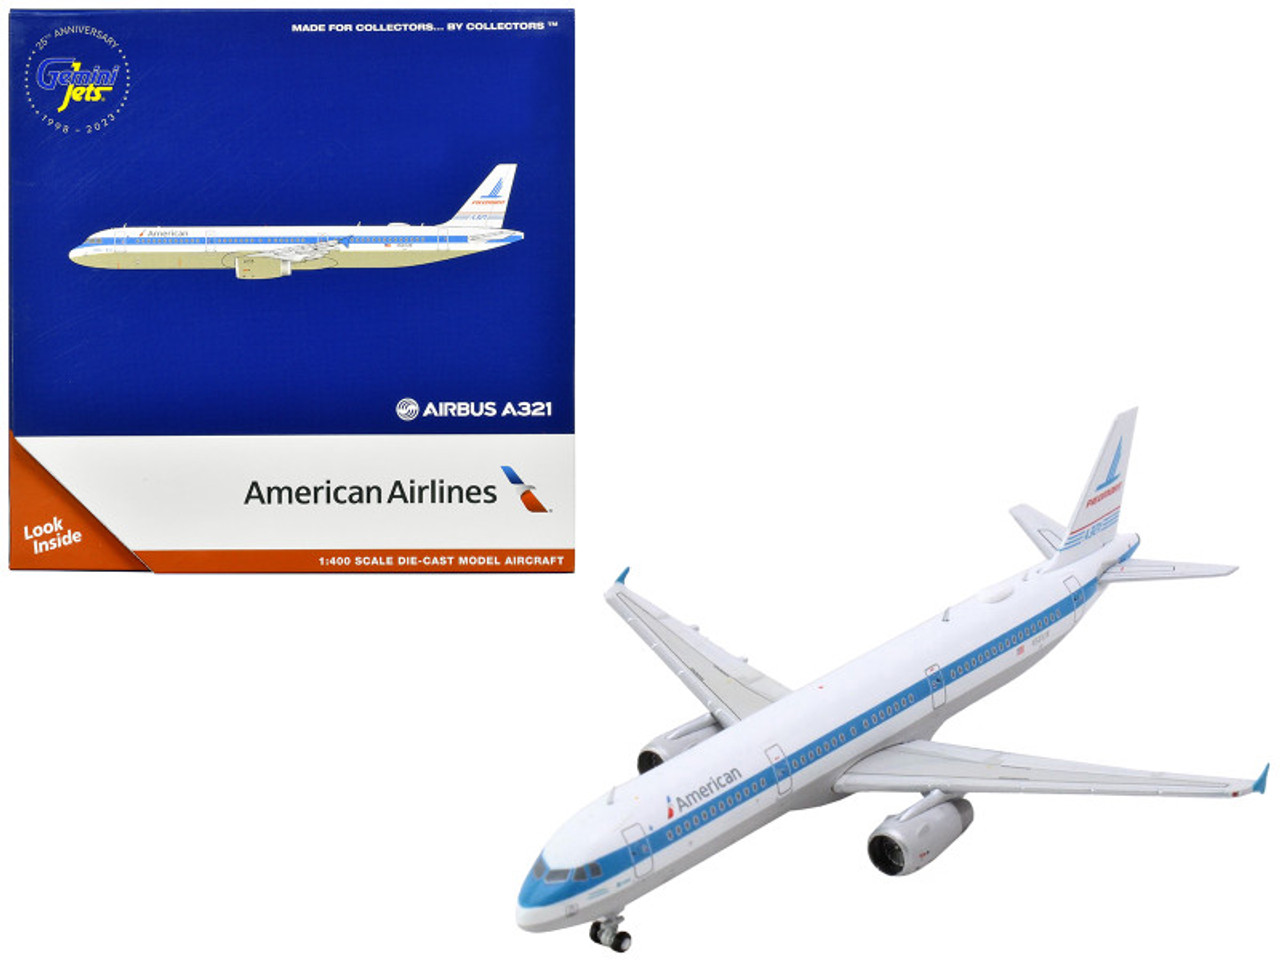 Airbus A321 Commercial Aircraft "American Airlines - Piedmont" (N581UW) White with Blue Stripes 1/400 Diecast Model Airplane by GeminiJets